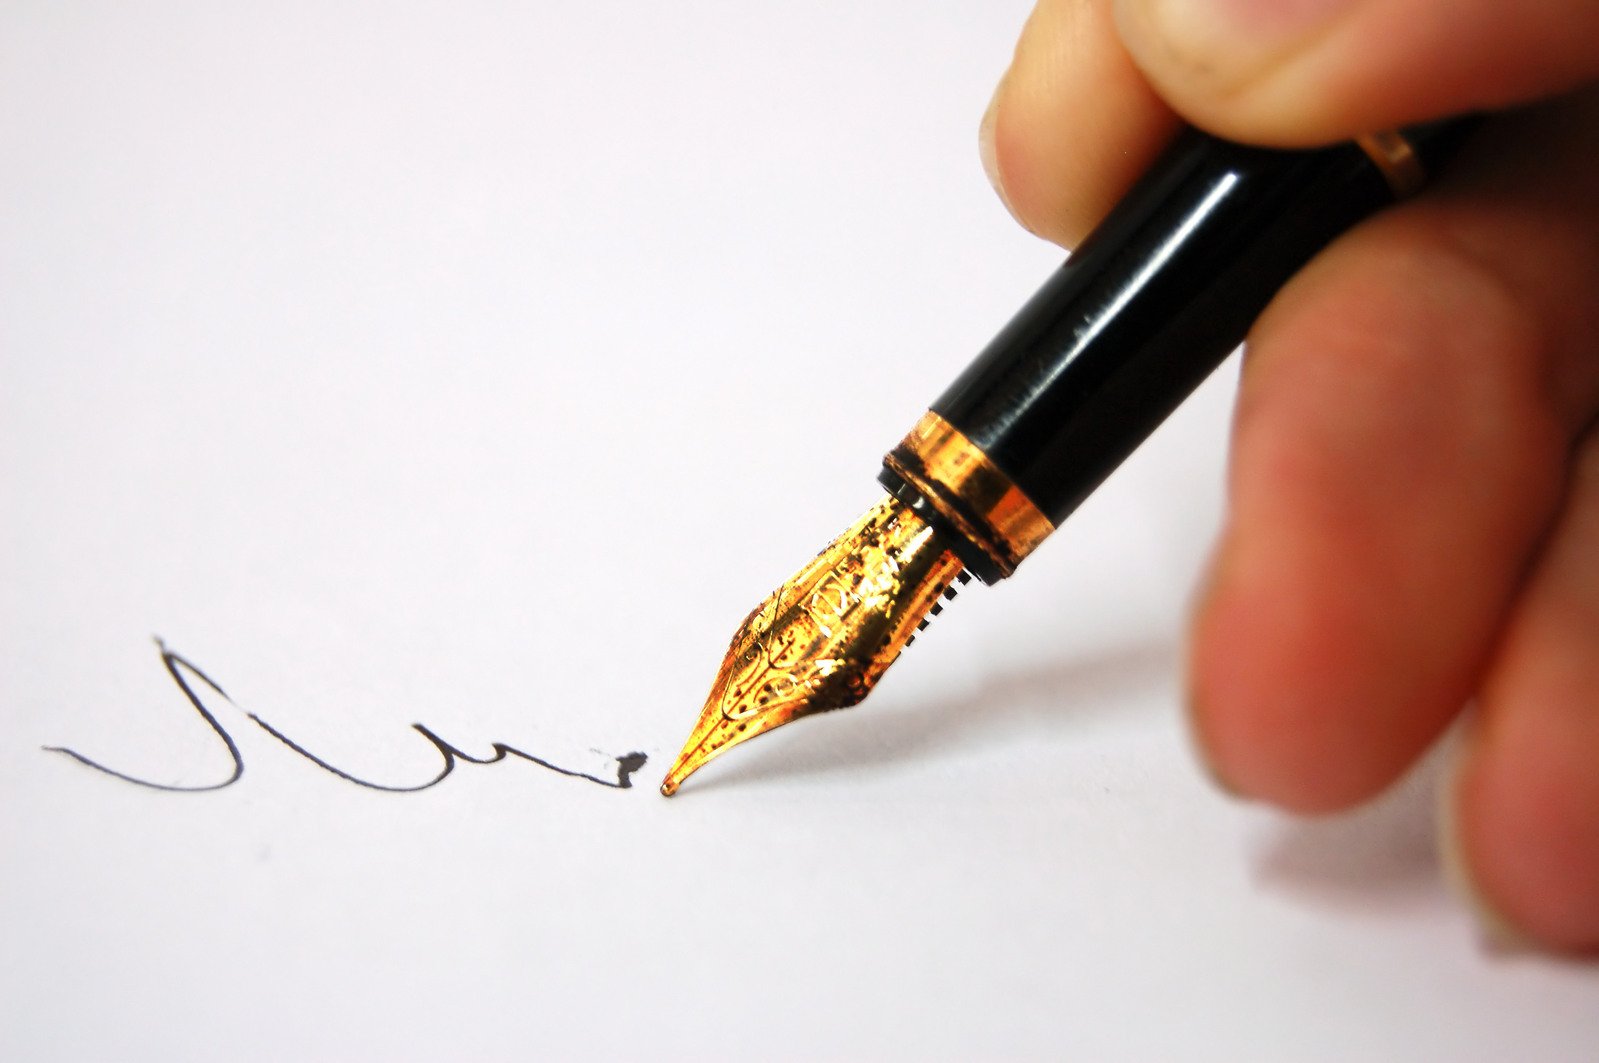 a person with a pen in their hand writes soing on paper